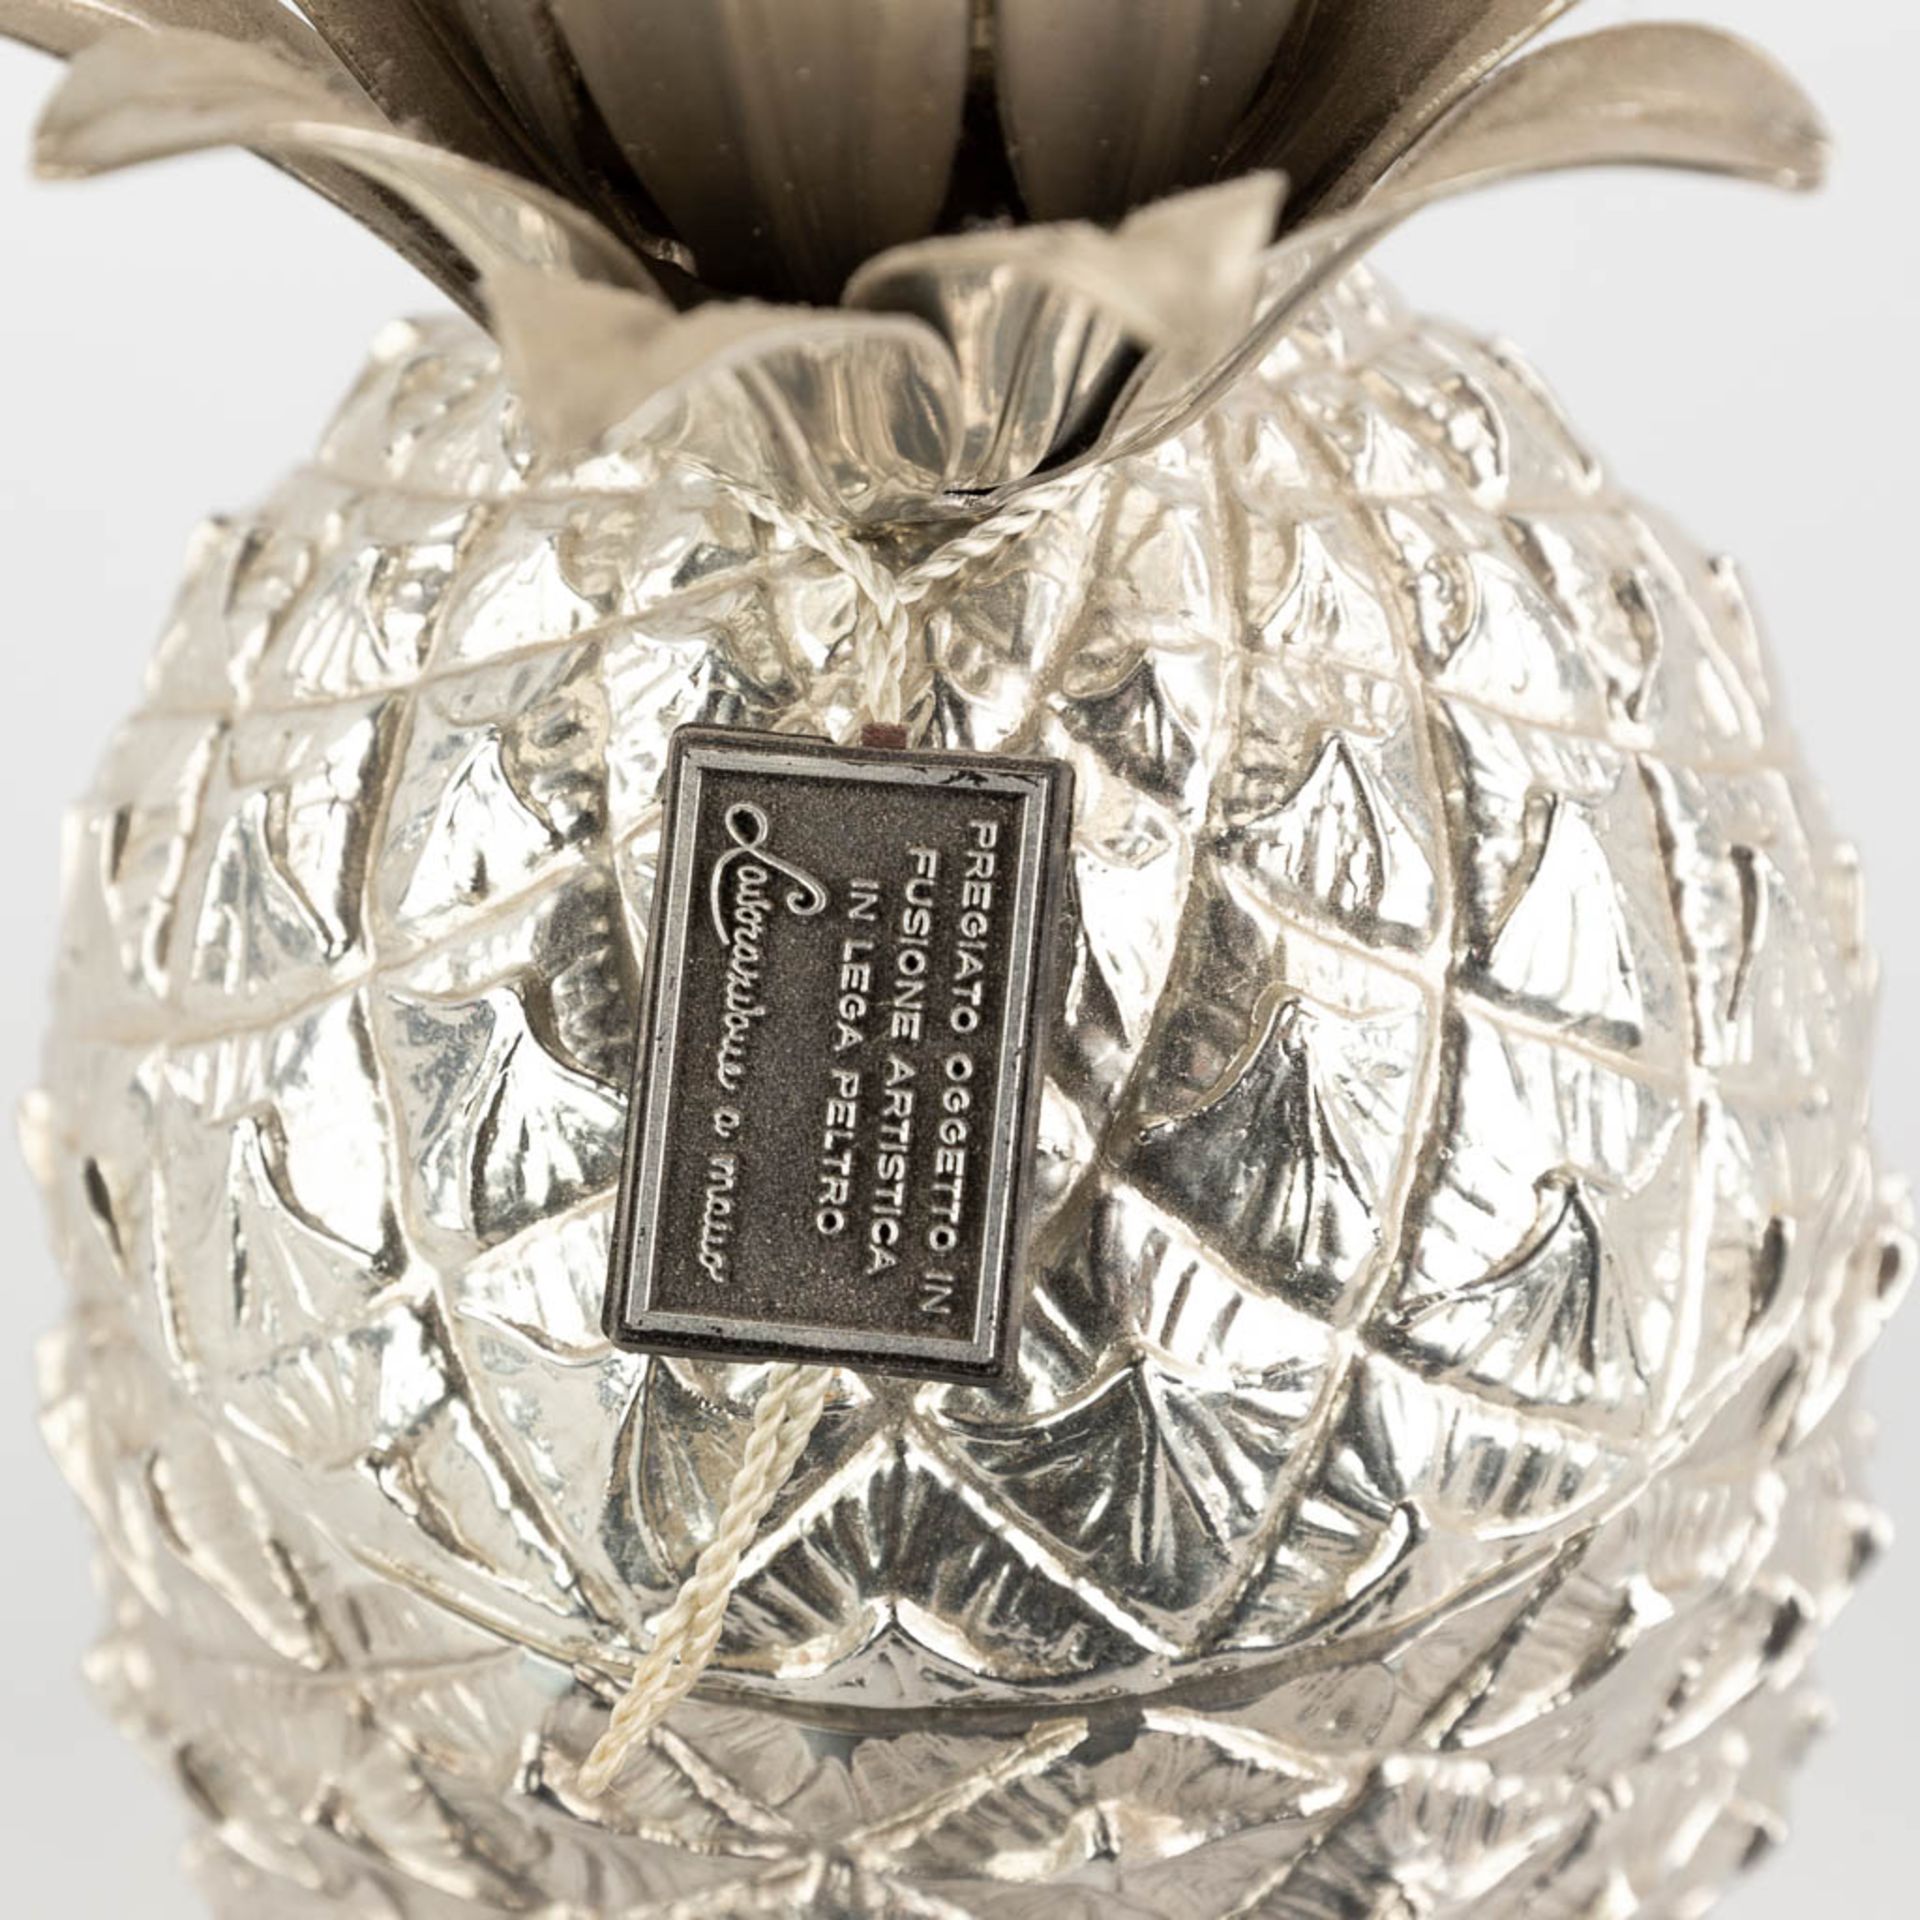 Mauro MANETTI (XX) 'Pineapple' an ice pail. (H:26 x D:14 cm) - Image 8 of 13